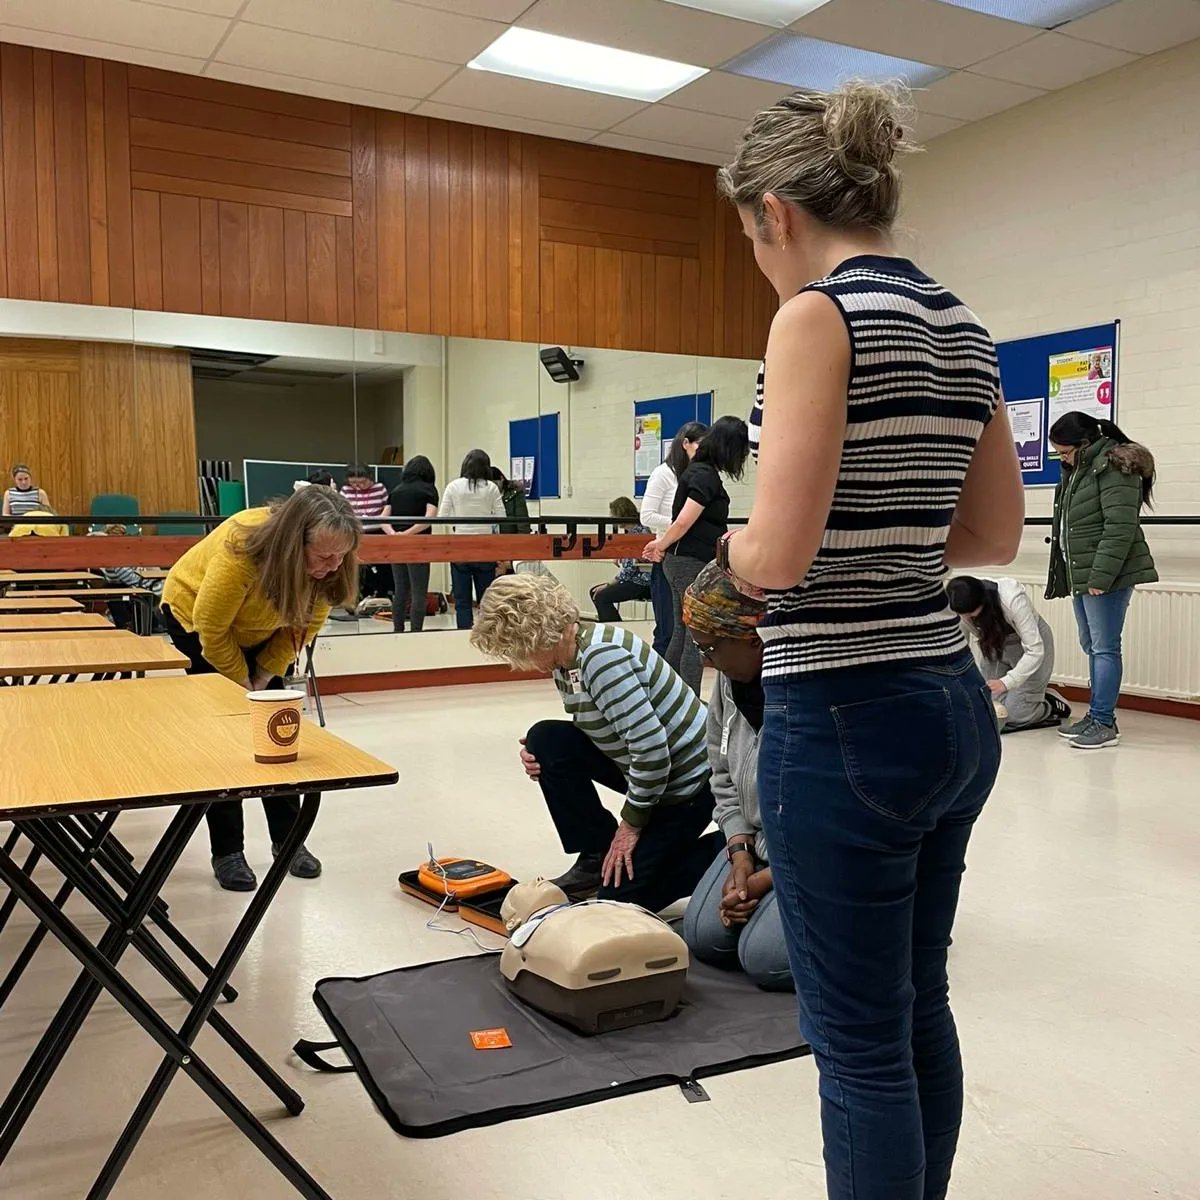 13 more lifesavers created today for FREE in Dad's name. This week, 32 people in the Greater London community have learnt basic lifesaving skills so that should they be bystanders during a cardiac arrest, they can confidently and quickly identify & manage the emergency🤍 Clare x